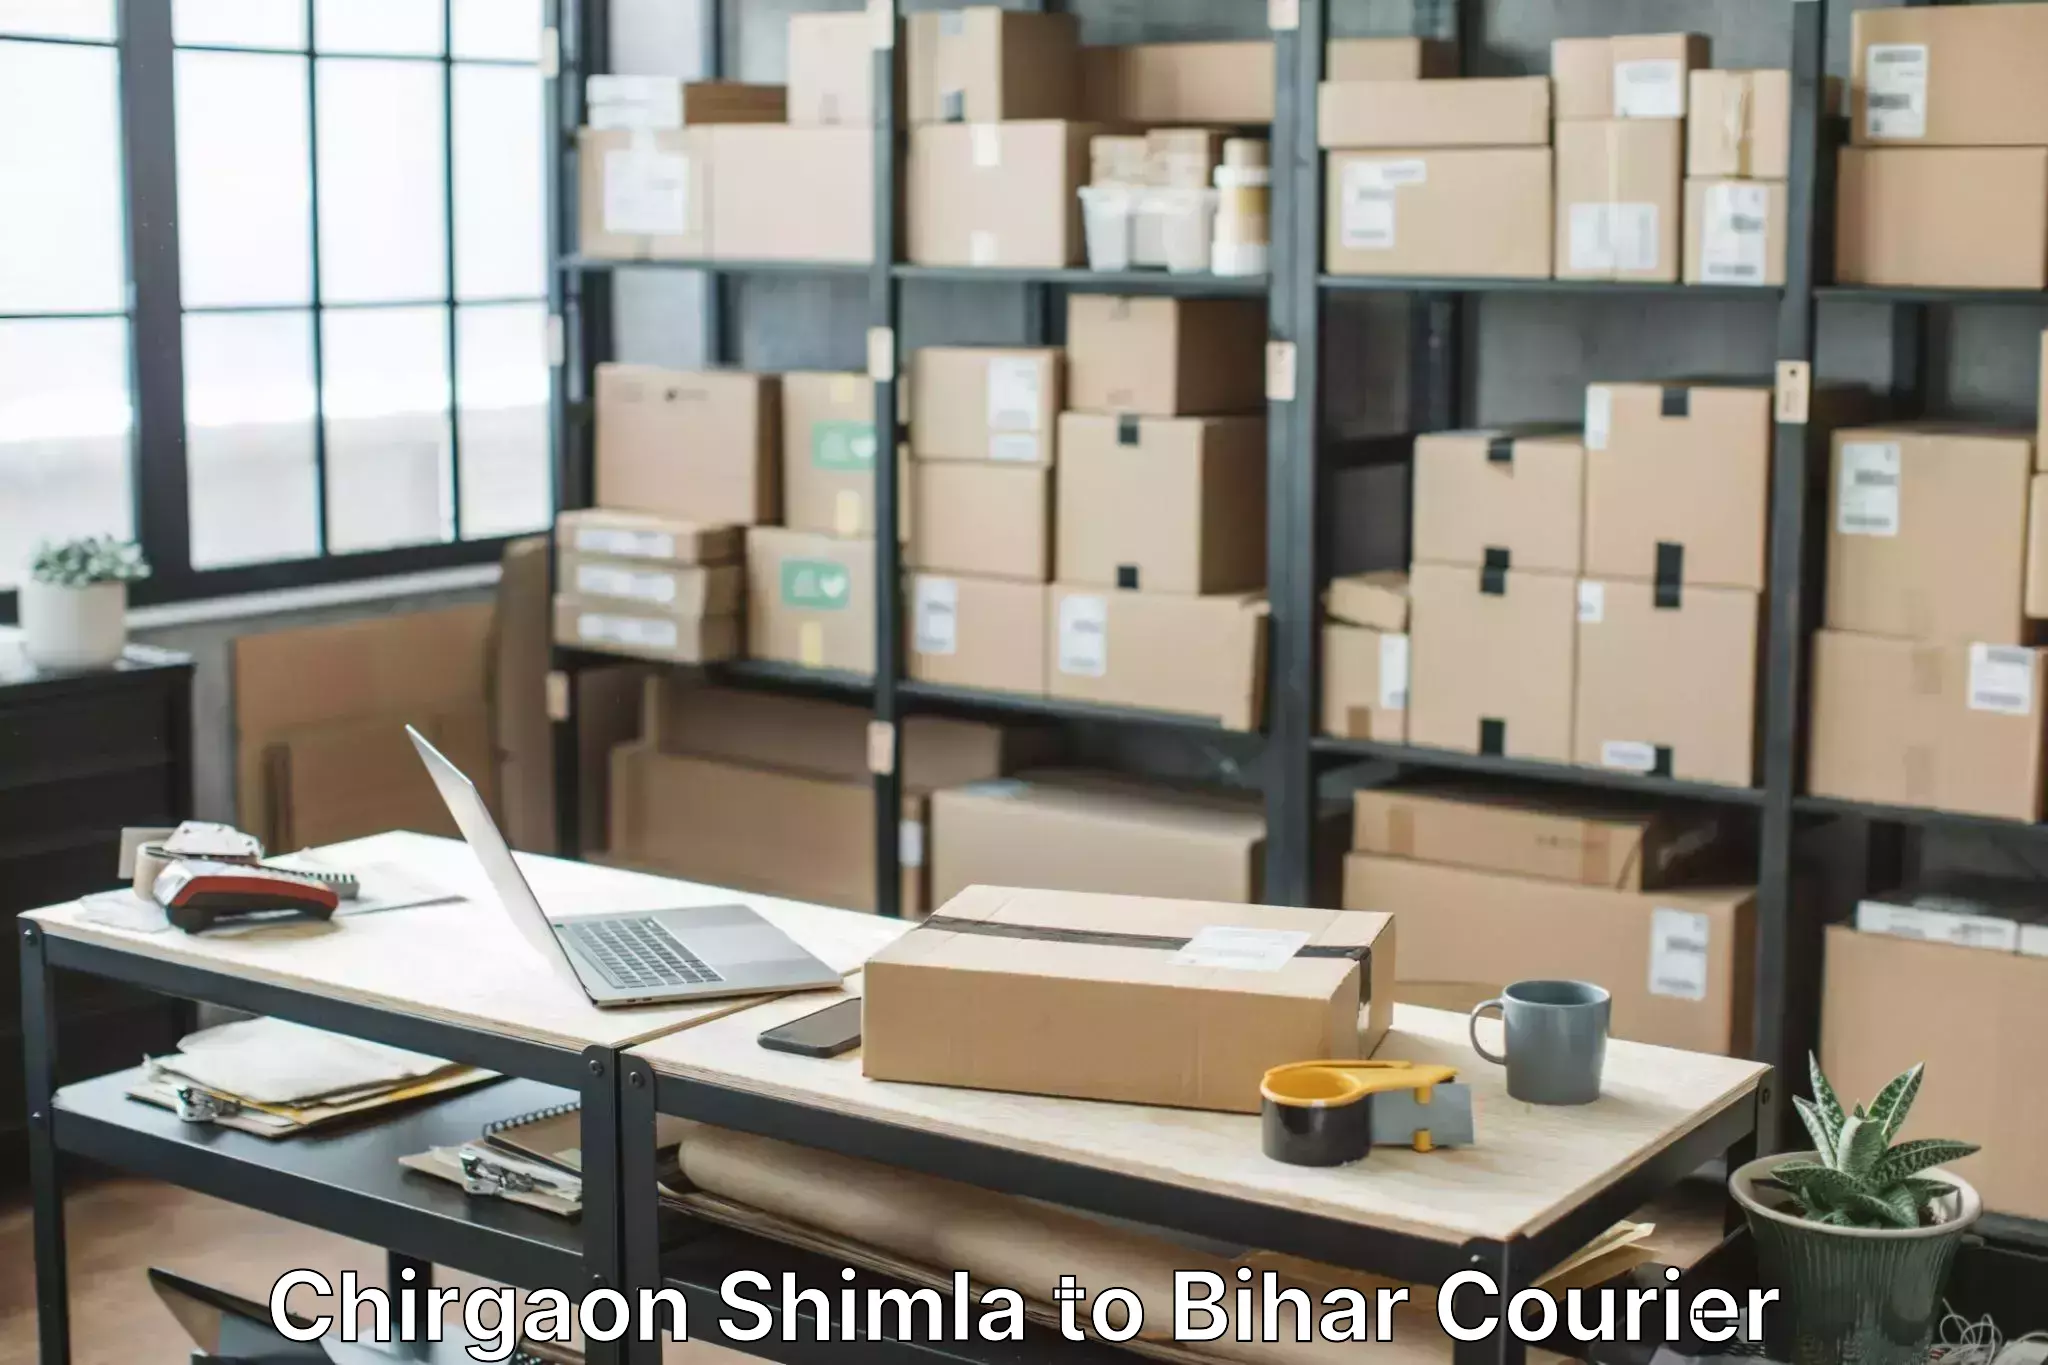 Quality relocation services in Chirgaon Shimla to Bihar